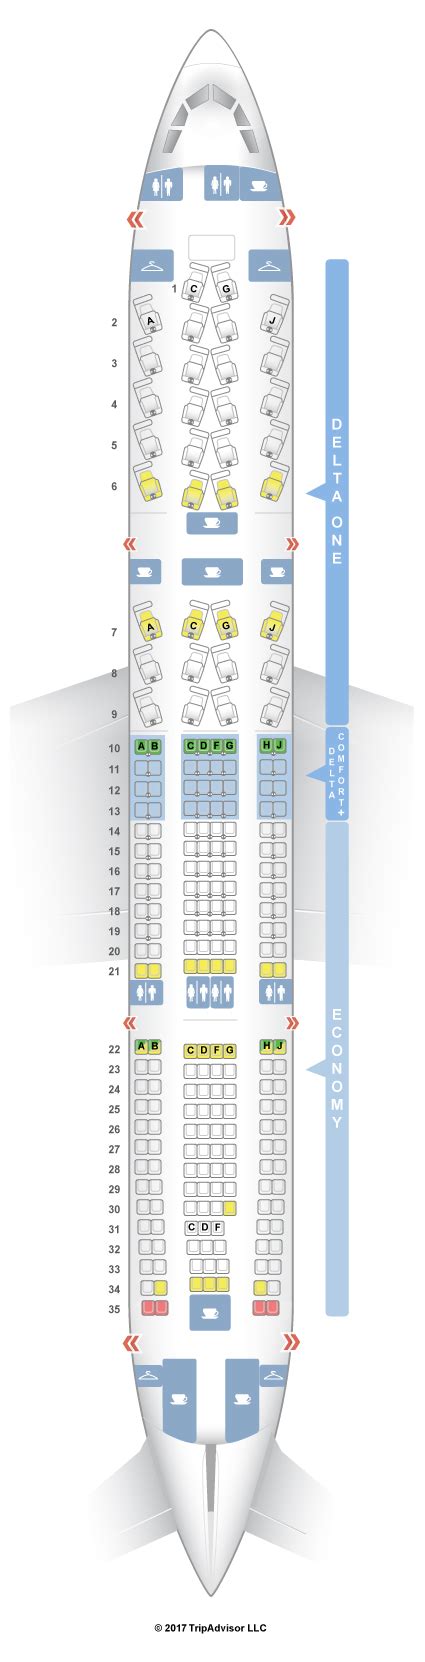 This Airbus A330-200 (332) seats 234 passengers and is primarily used on International routes. This next-generation aircraft features 34 flat-bed Delta One seats, 32 Delta Comfort+ seats, and 168 Economy seats..